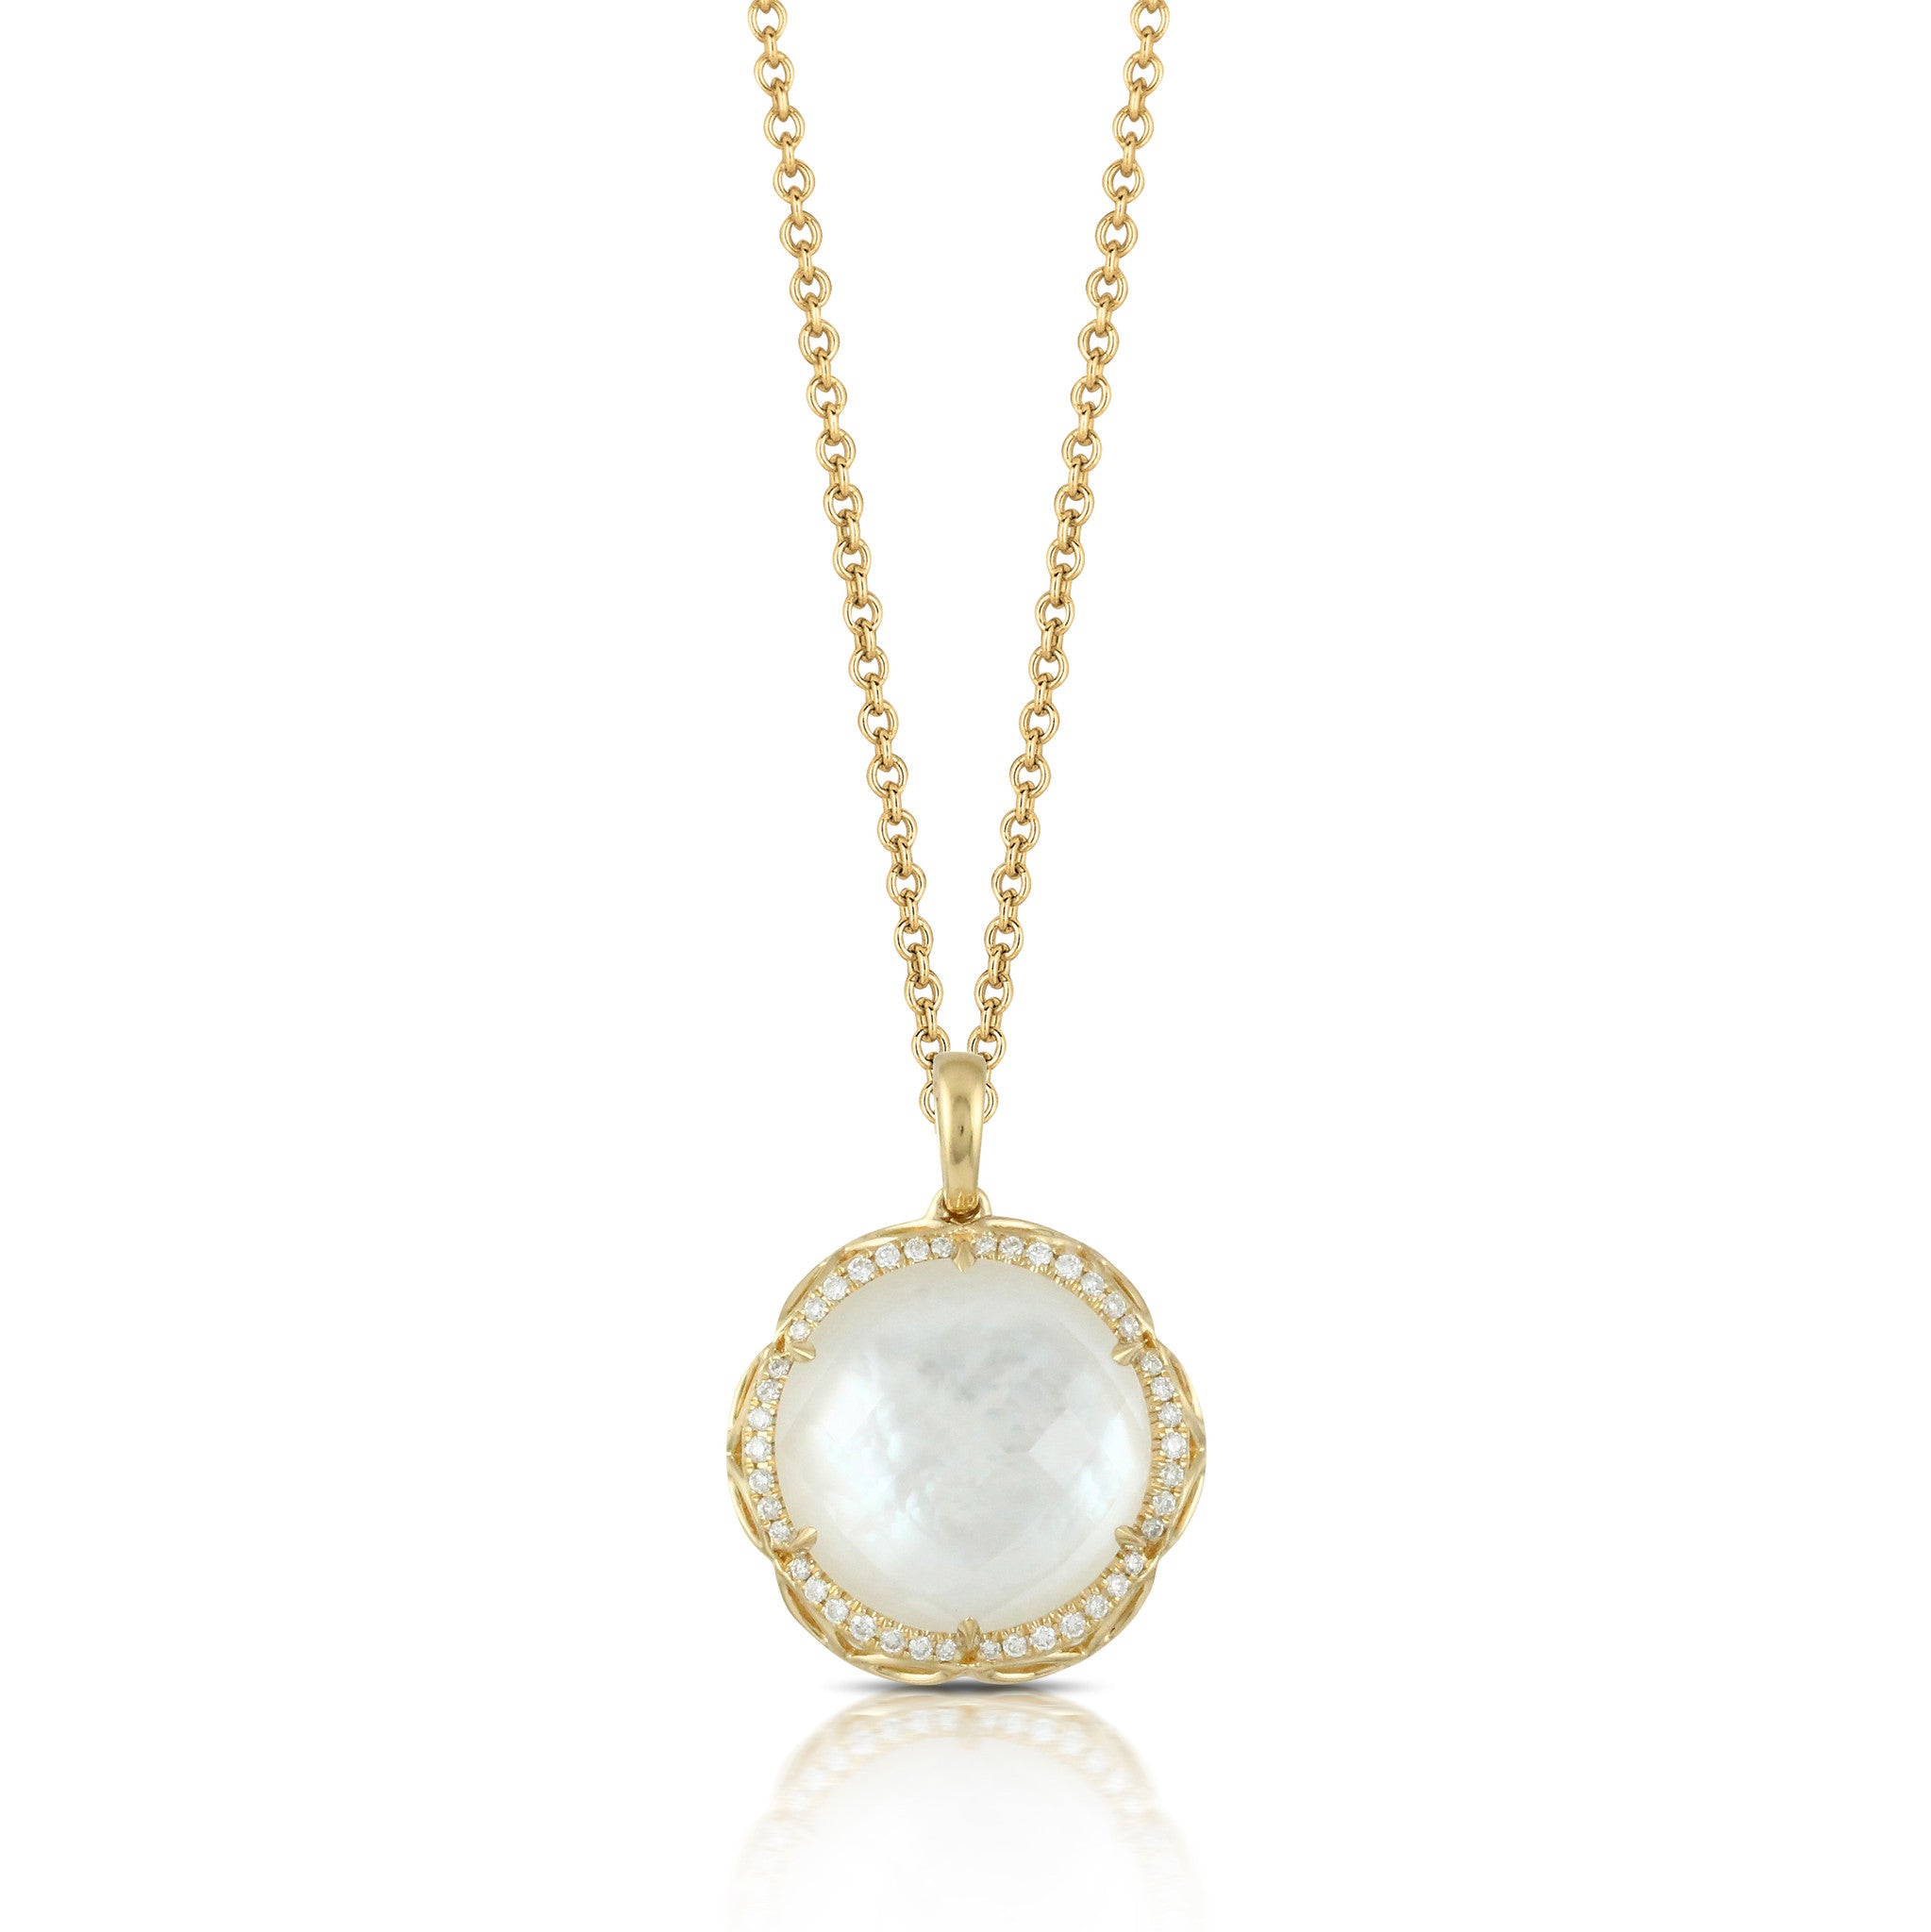 Doves White Orchid Eighteen Karat Yellow Gold Pendant with Mother of Pearl and Diamonds